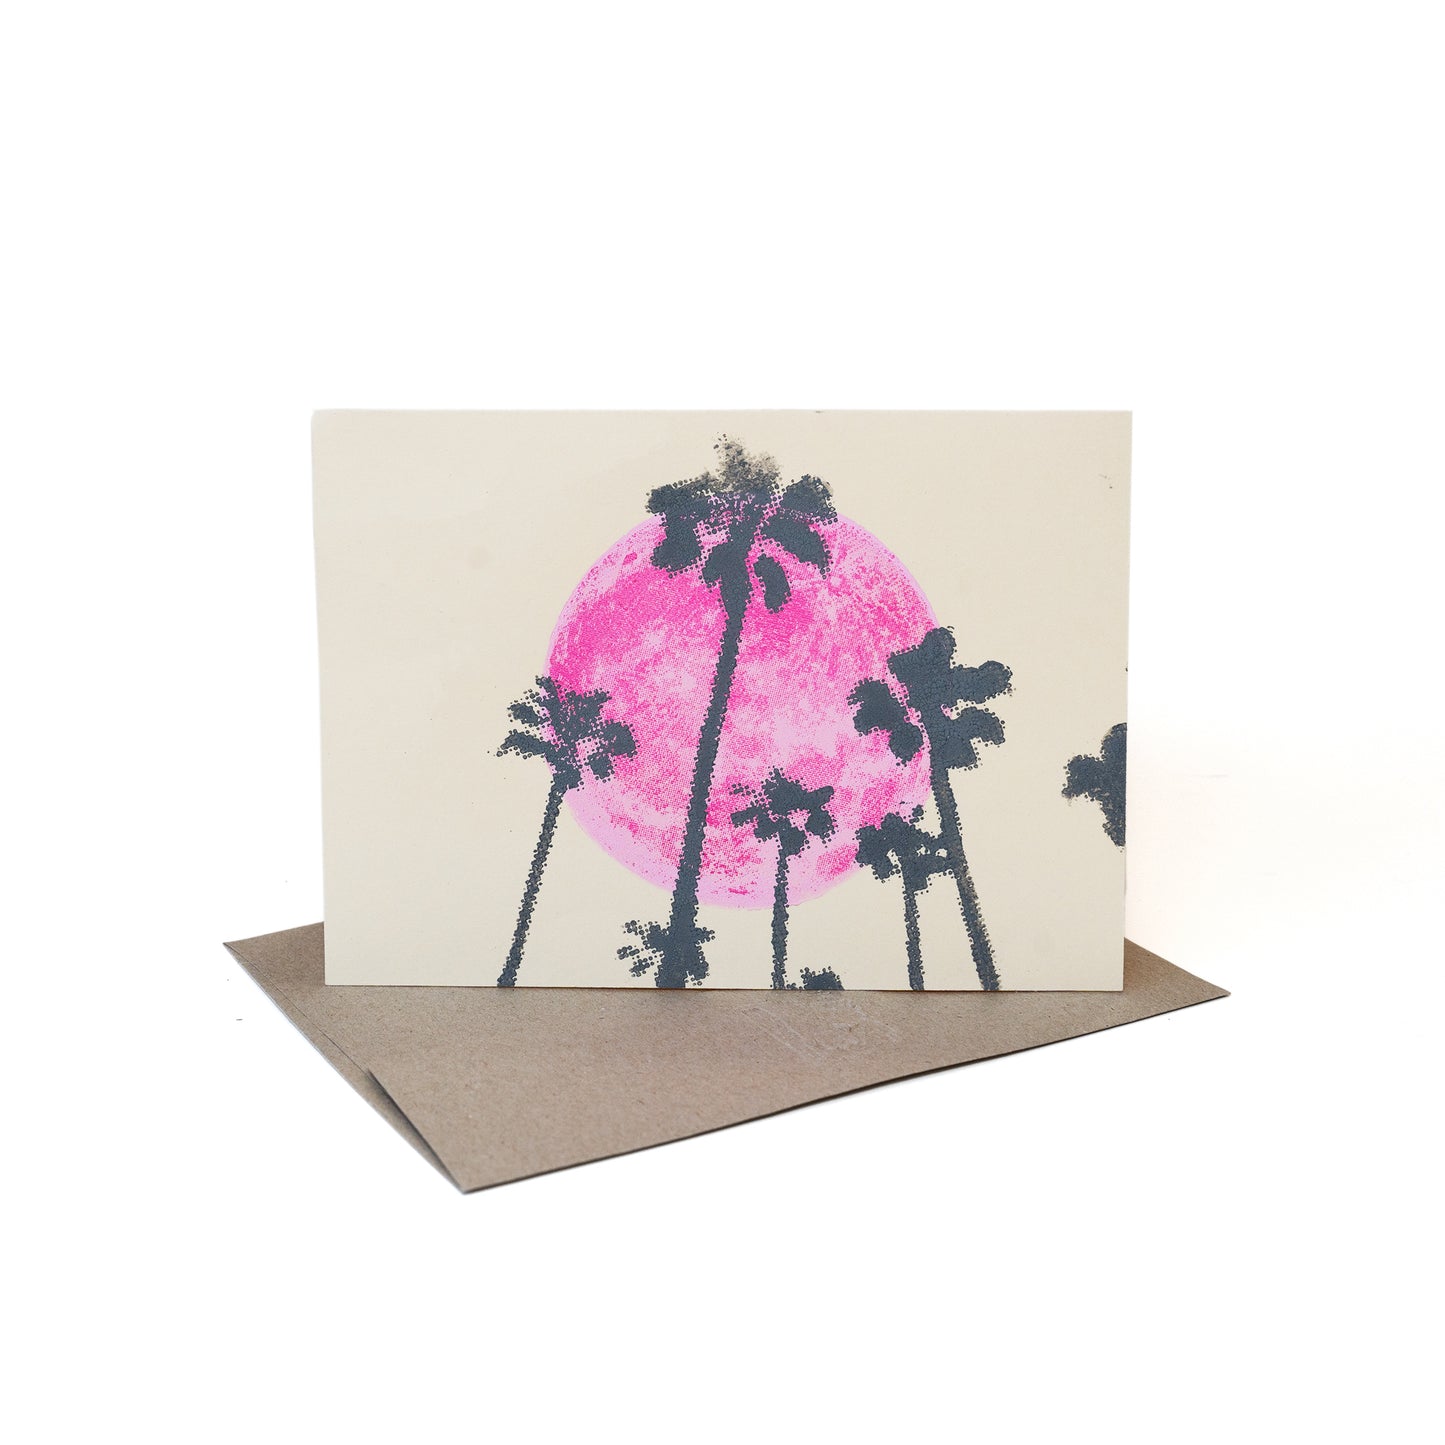 Palms in the Pink Moonlite